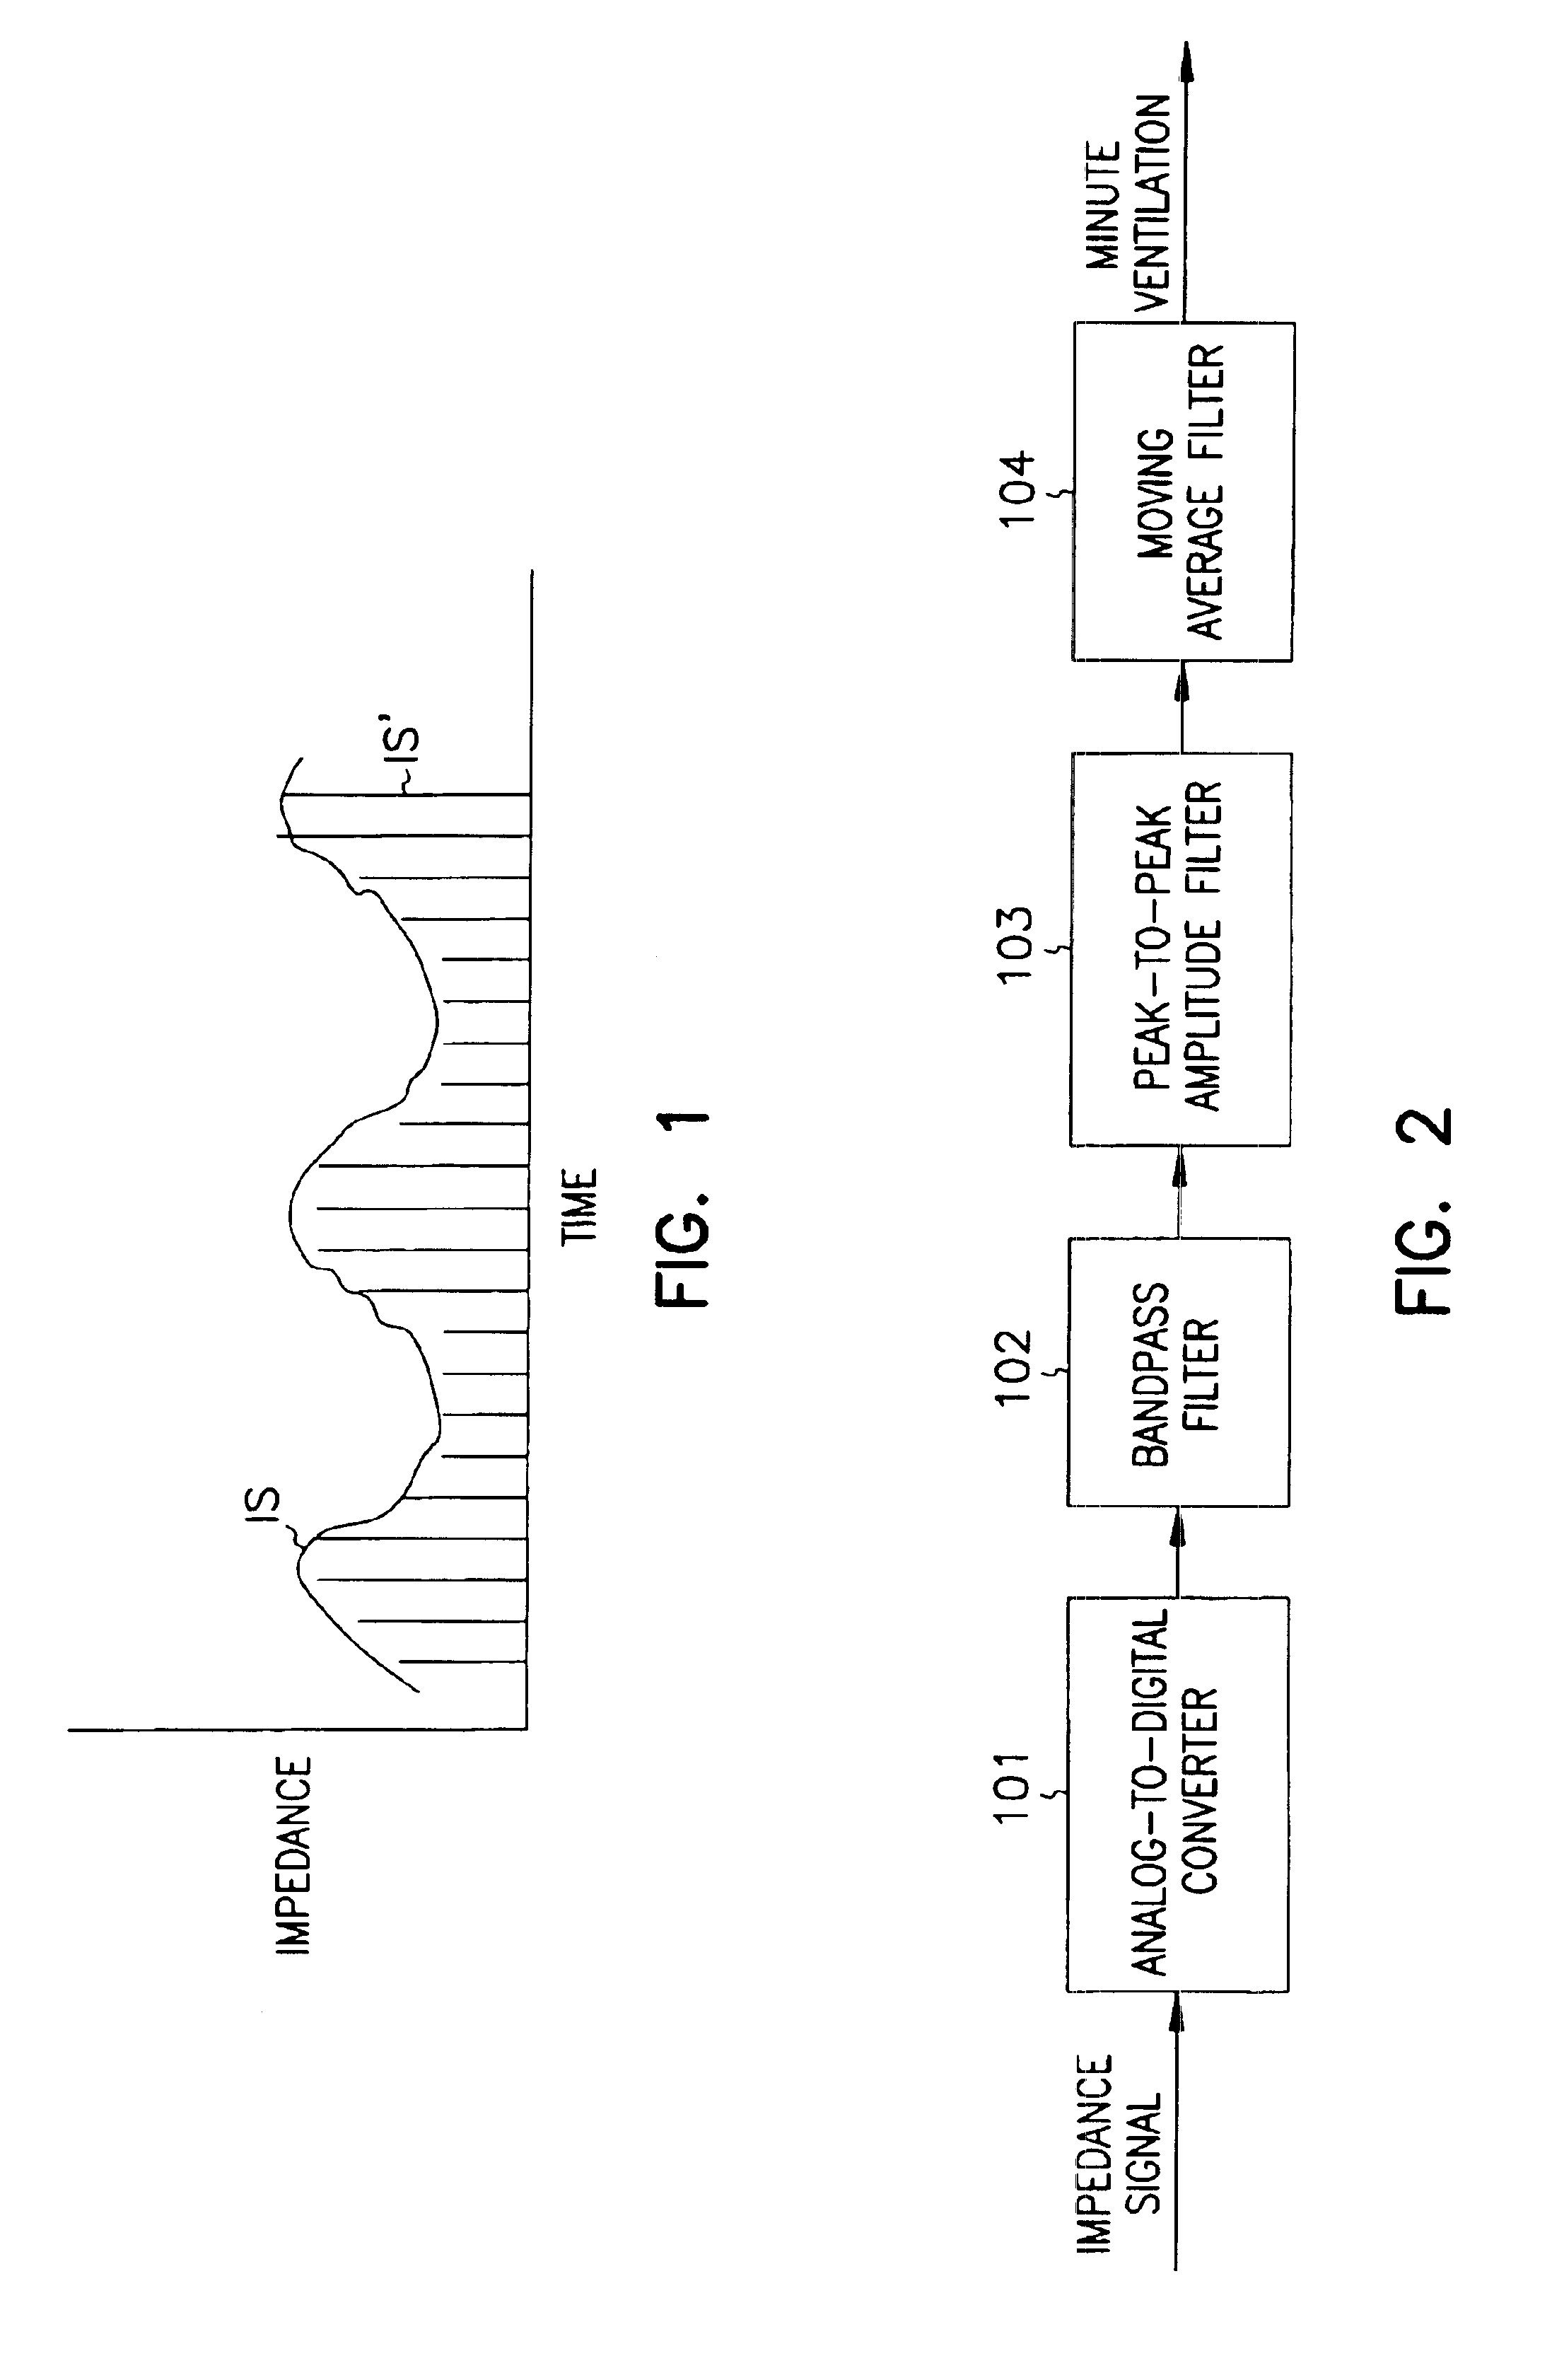 Minute ventilation sensor with automatic high pass filter adjustment